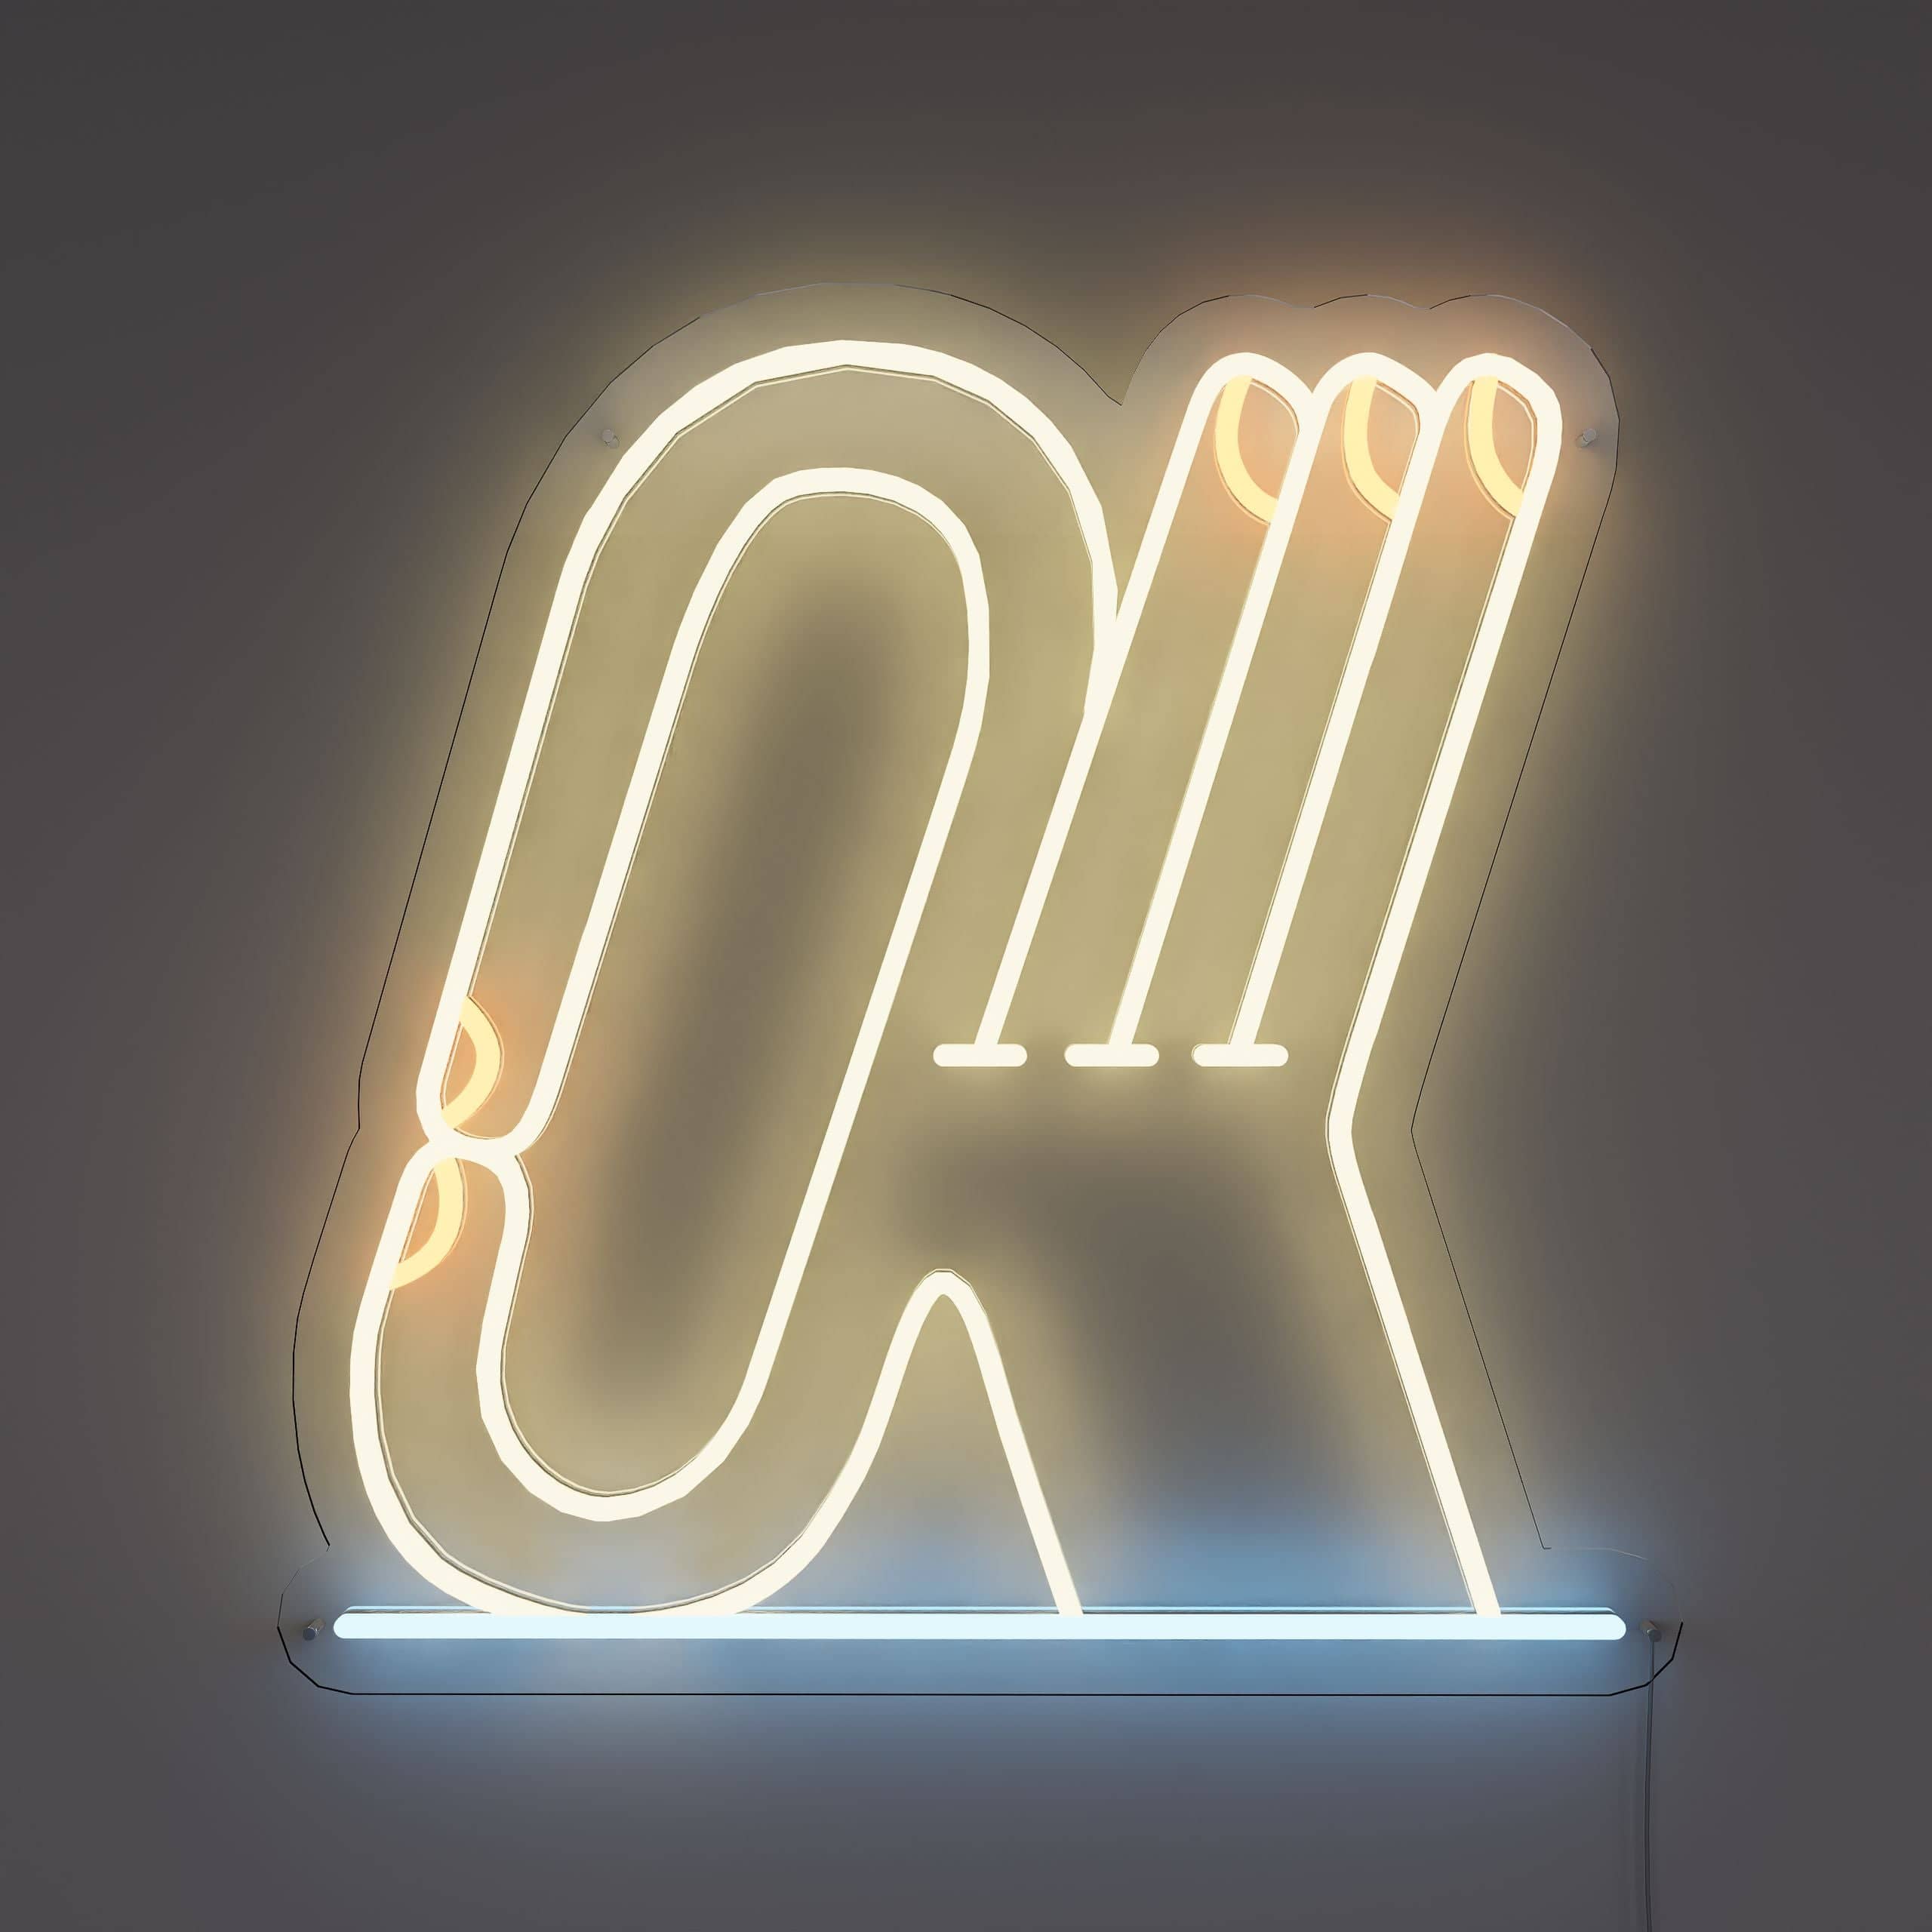 Bright It's OK Neon Sign lights up living room